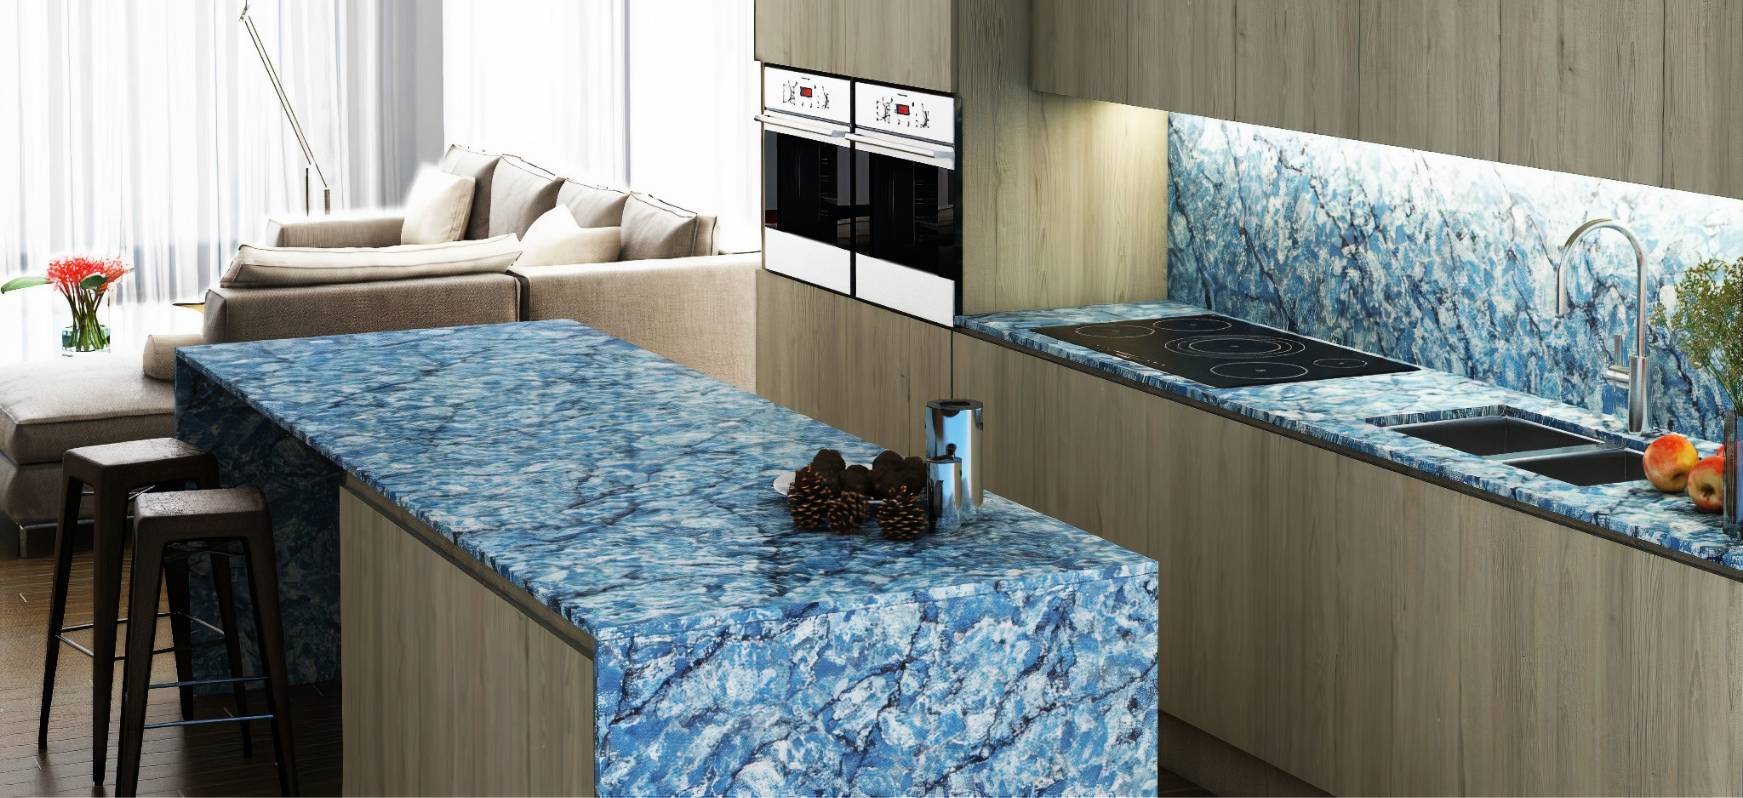 idea for kitchen wall blue countertops